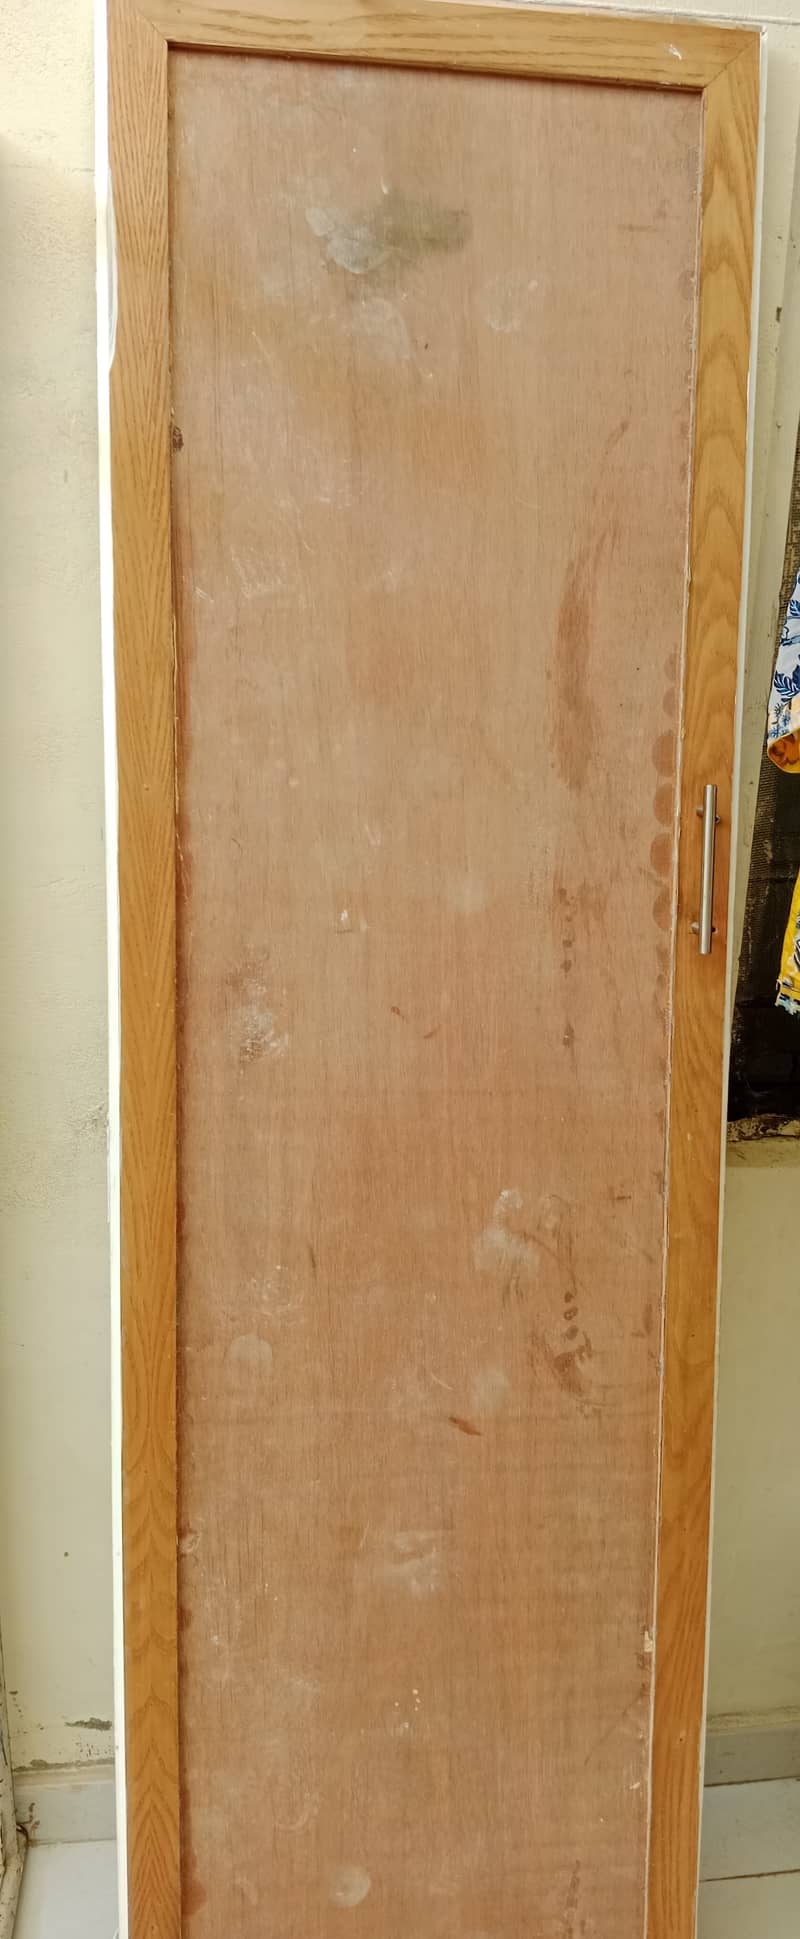 Door for sale neat and clean only WhatsUp 03060103003 4